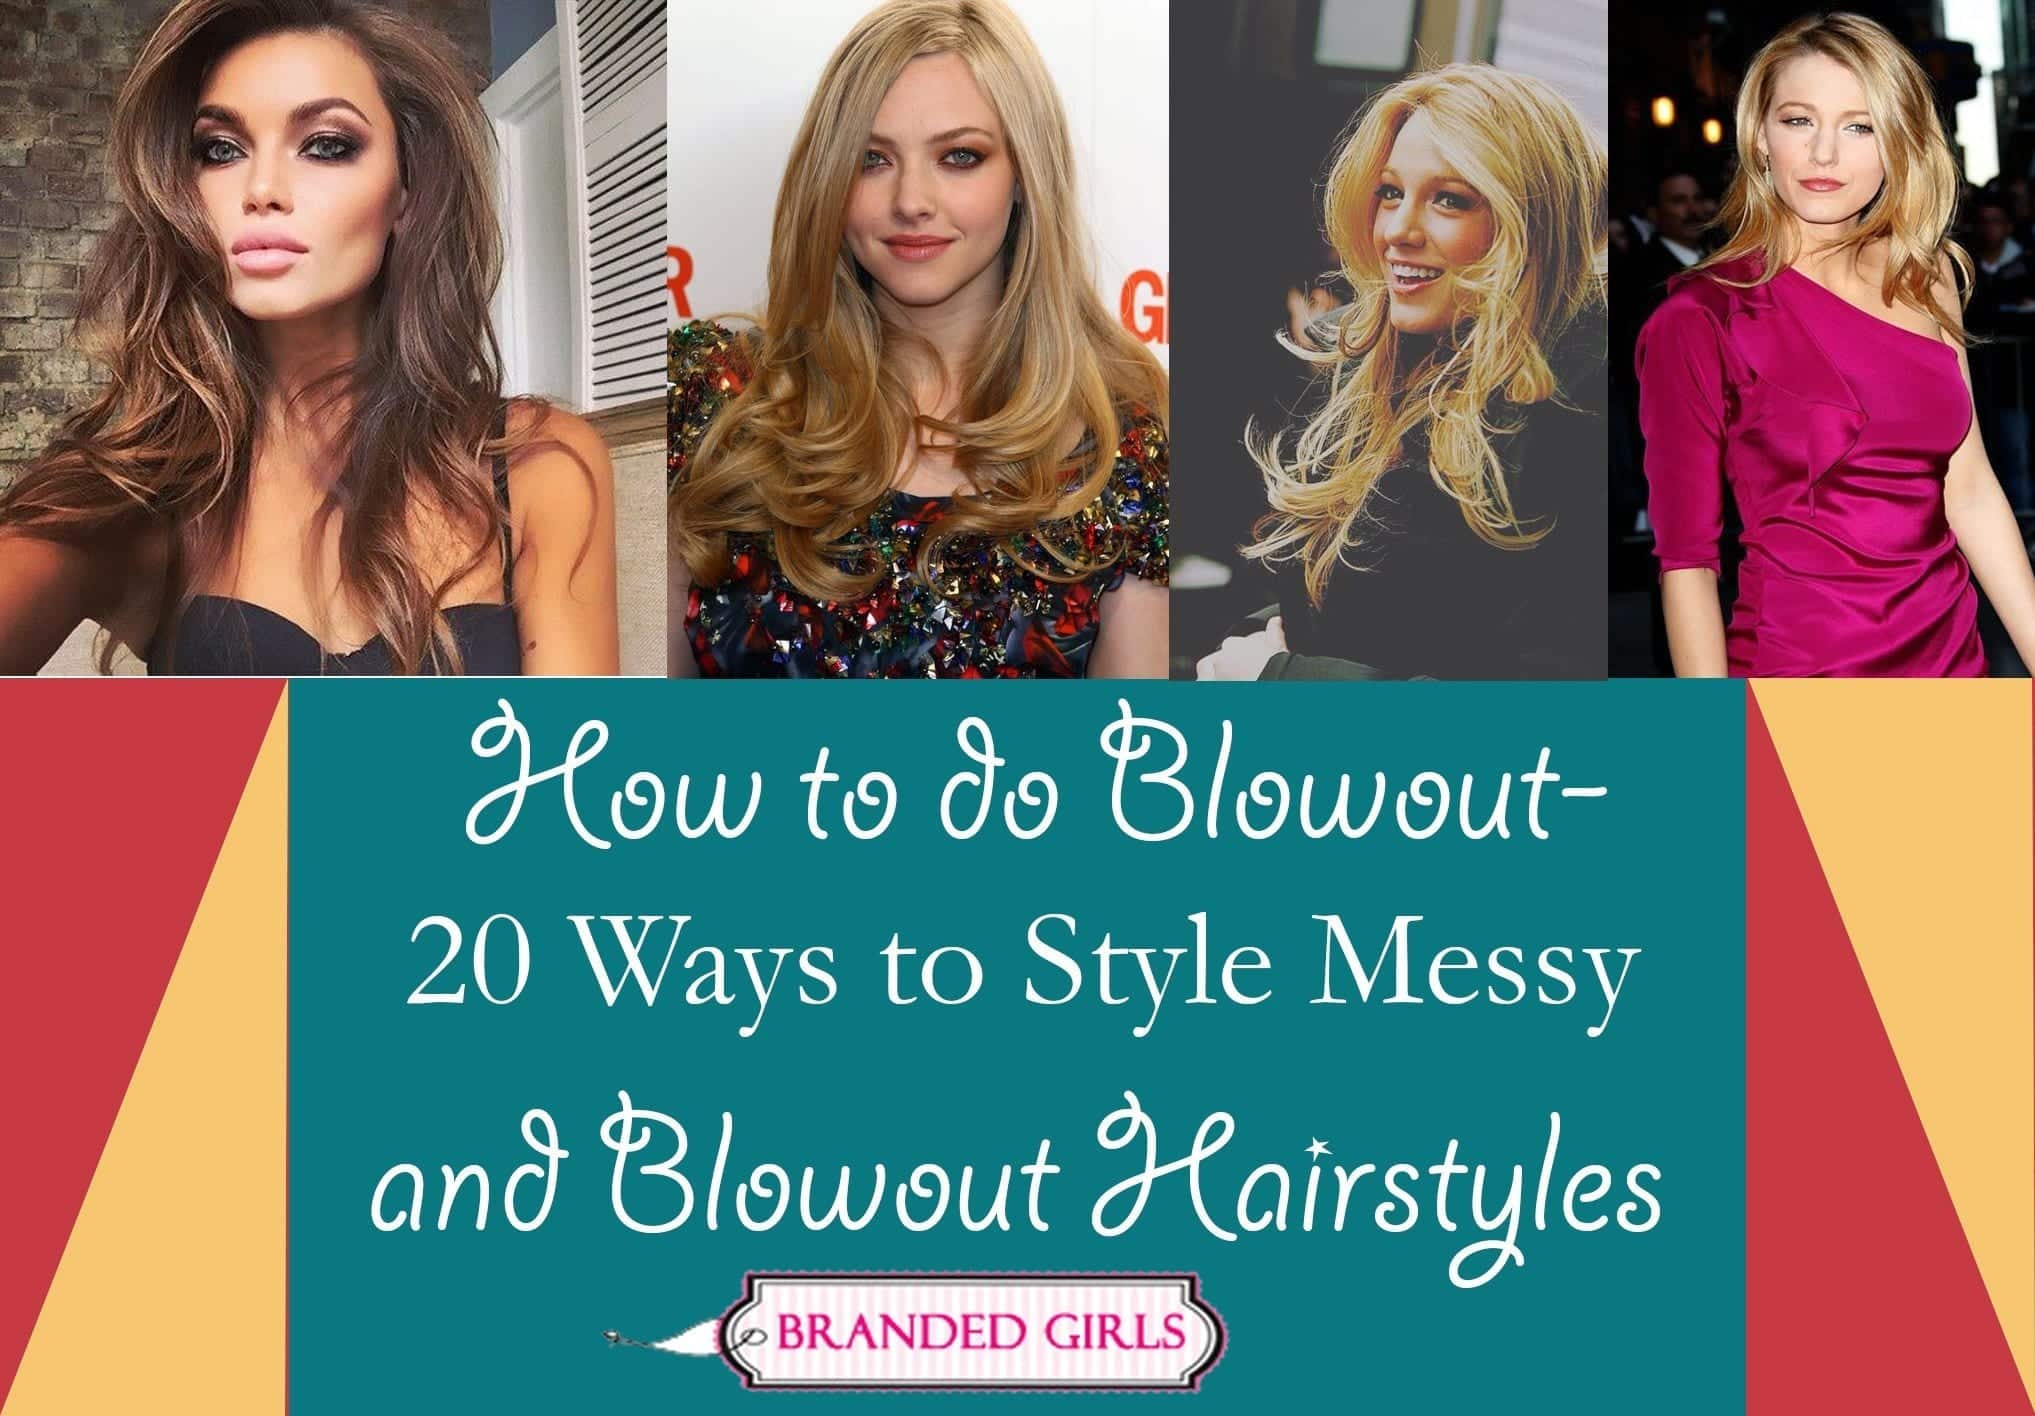 How to do Blowout-20 Ideas for Messy and Blowout Hairstyles